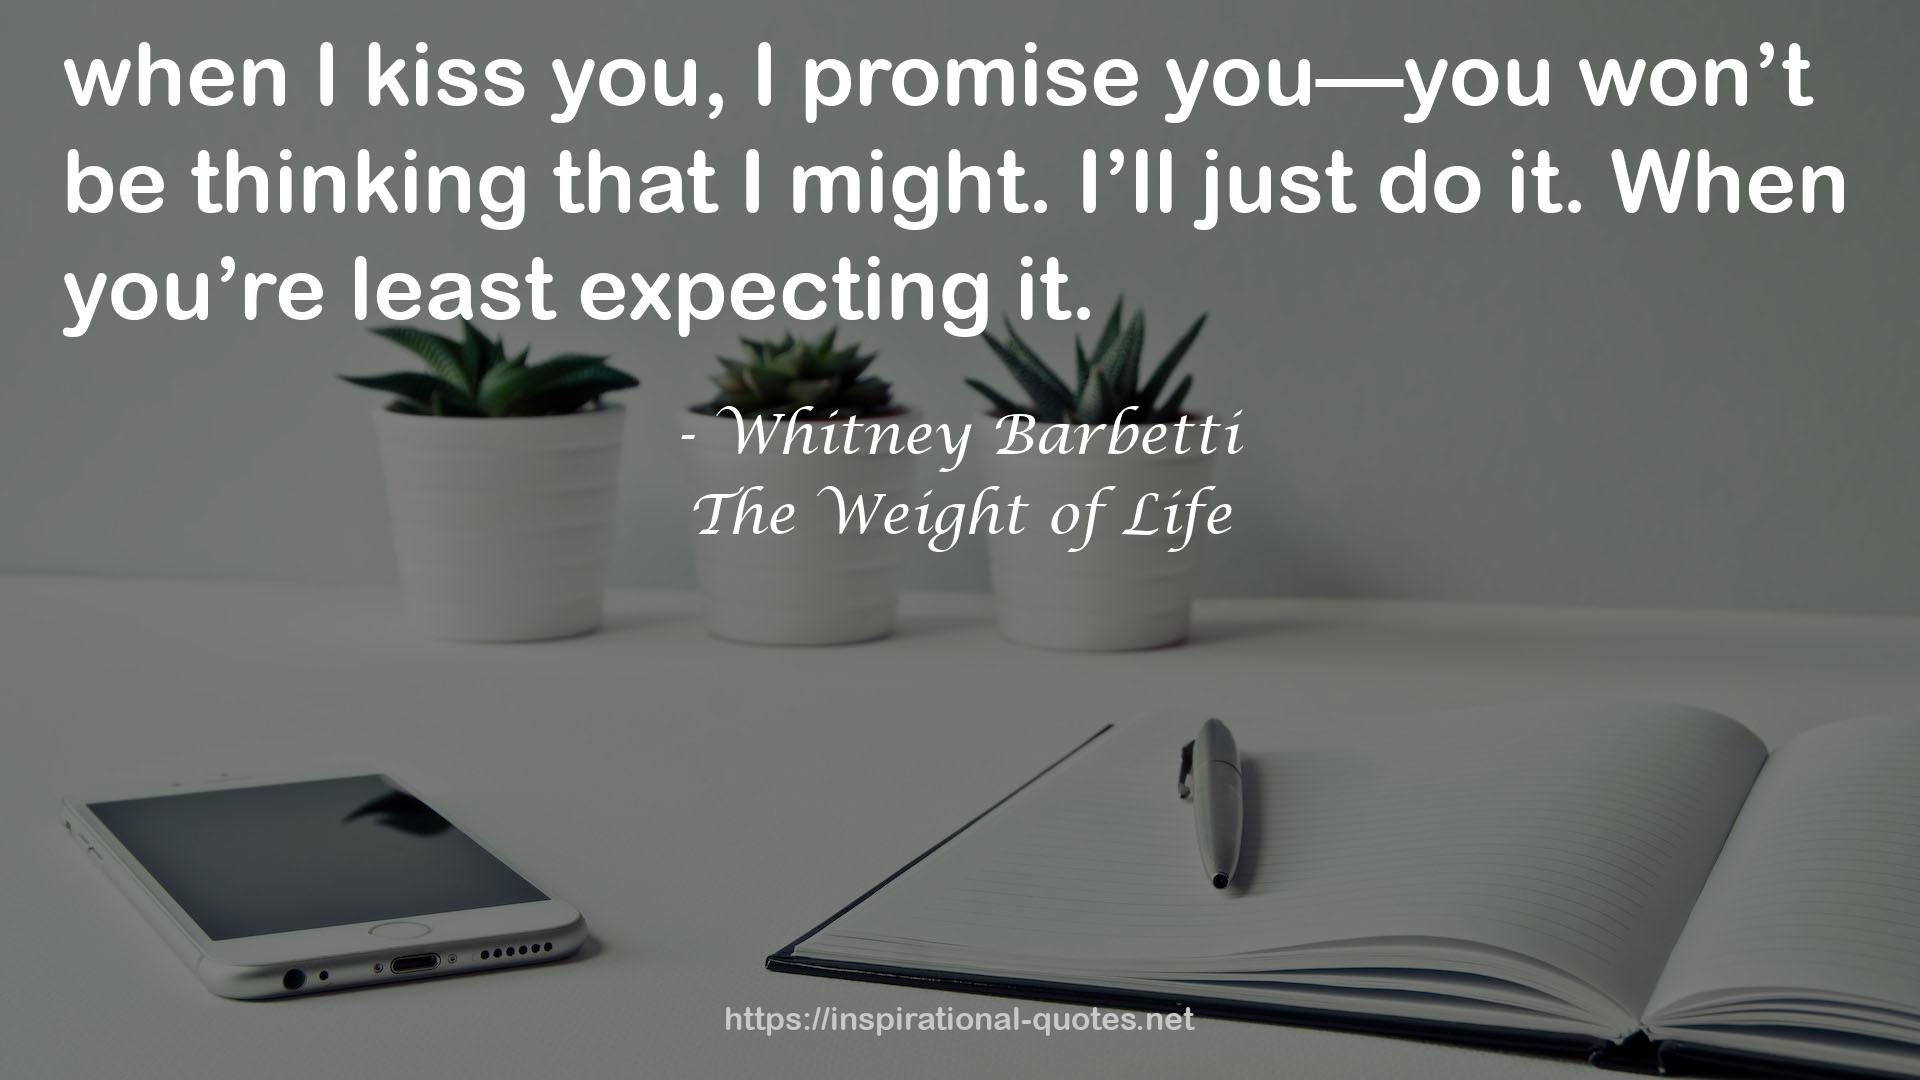 The Weight of Life QUOTES